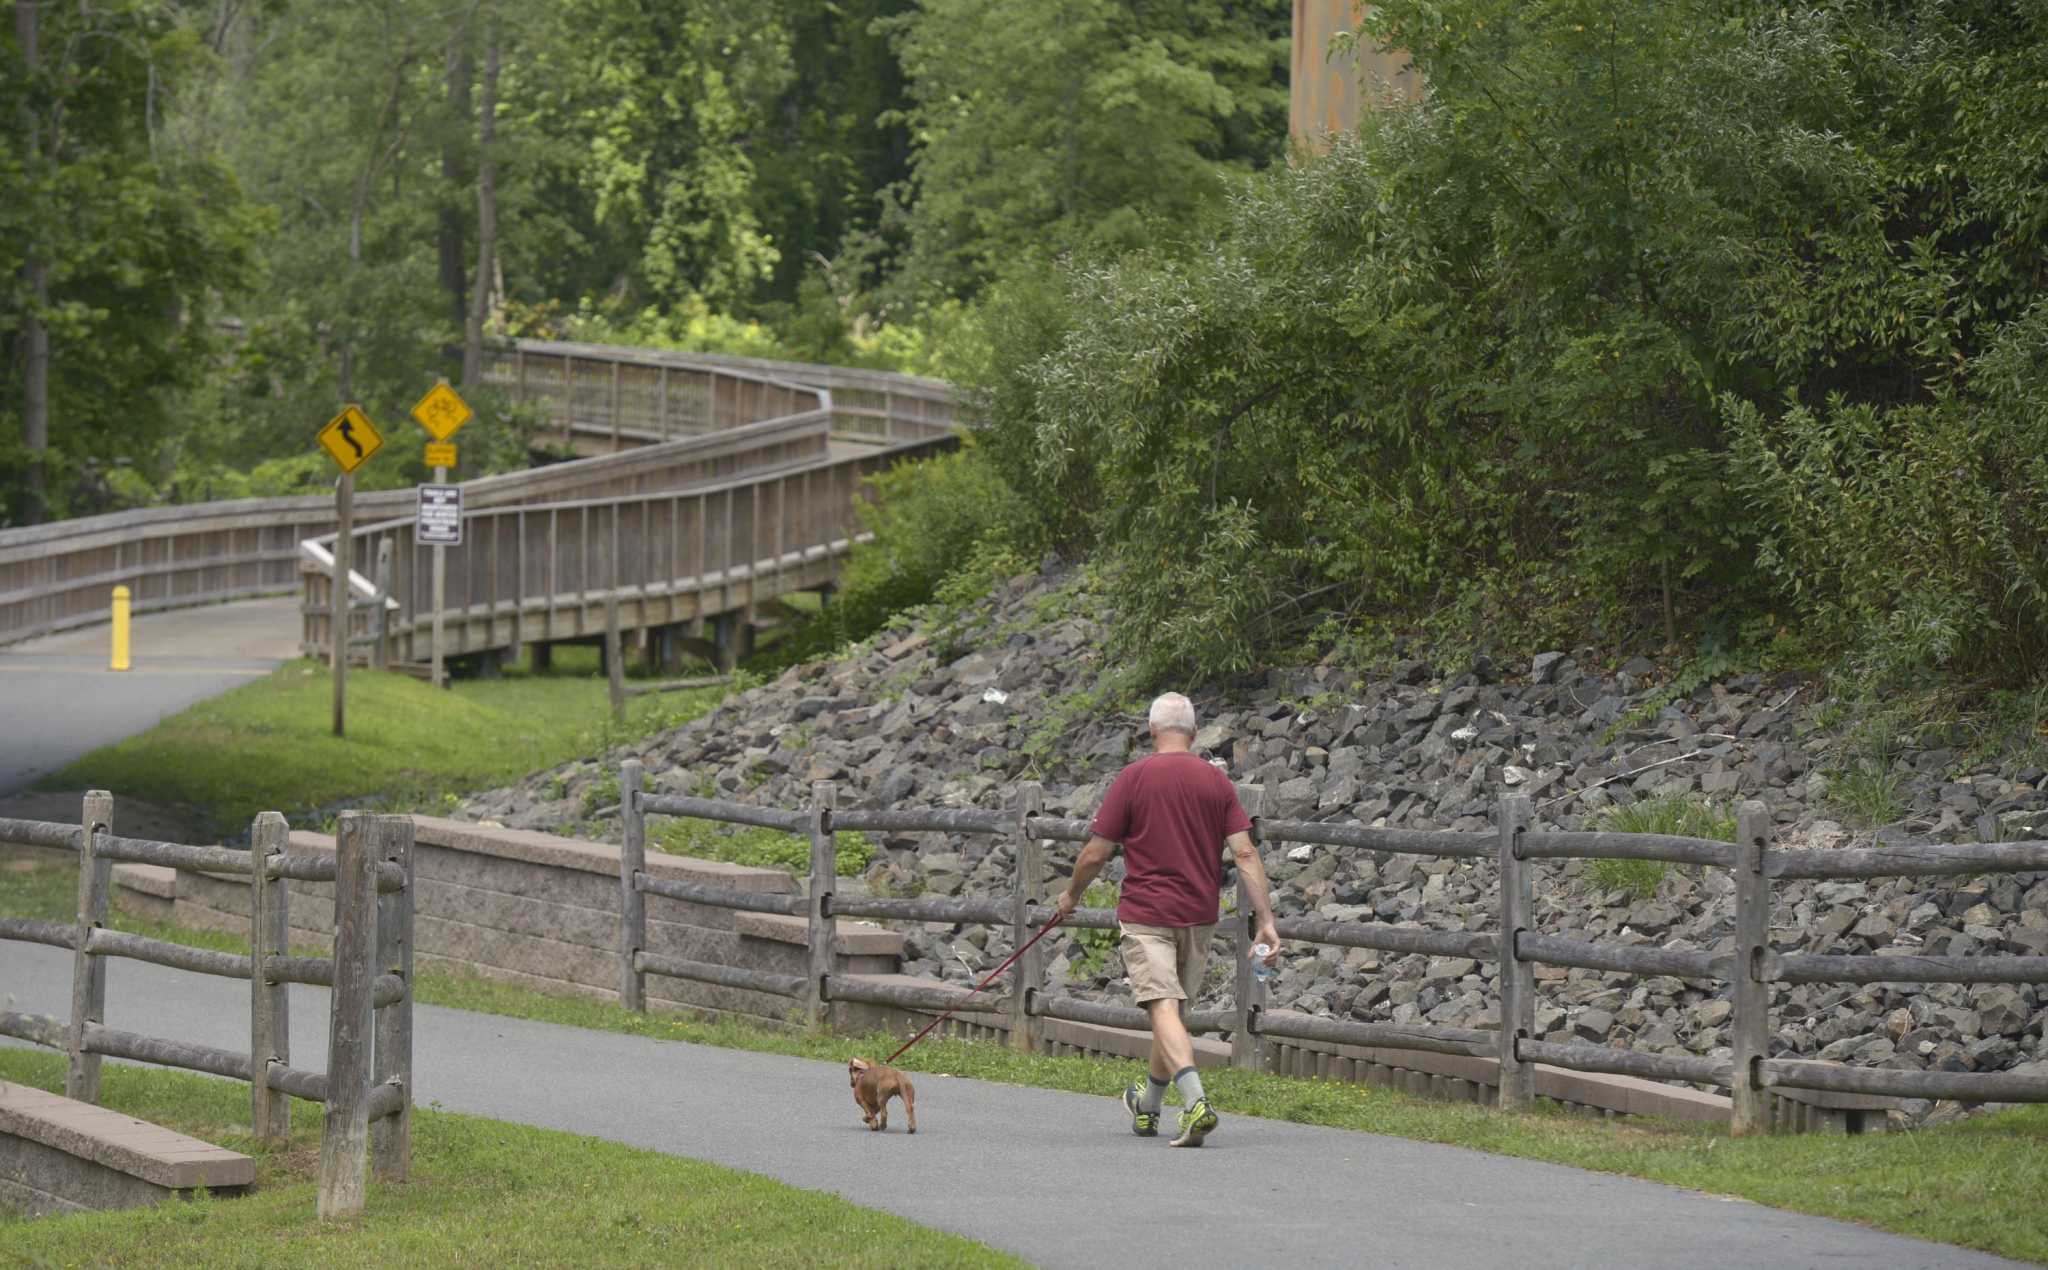 Brookfield looks to expand Still River Greenway to New Milford